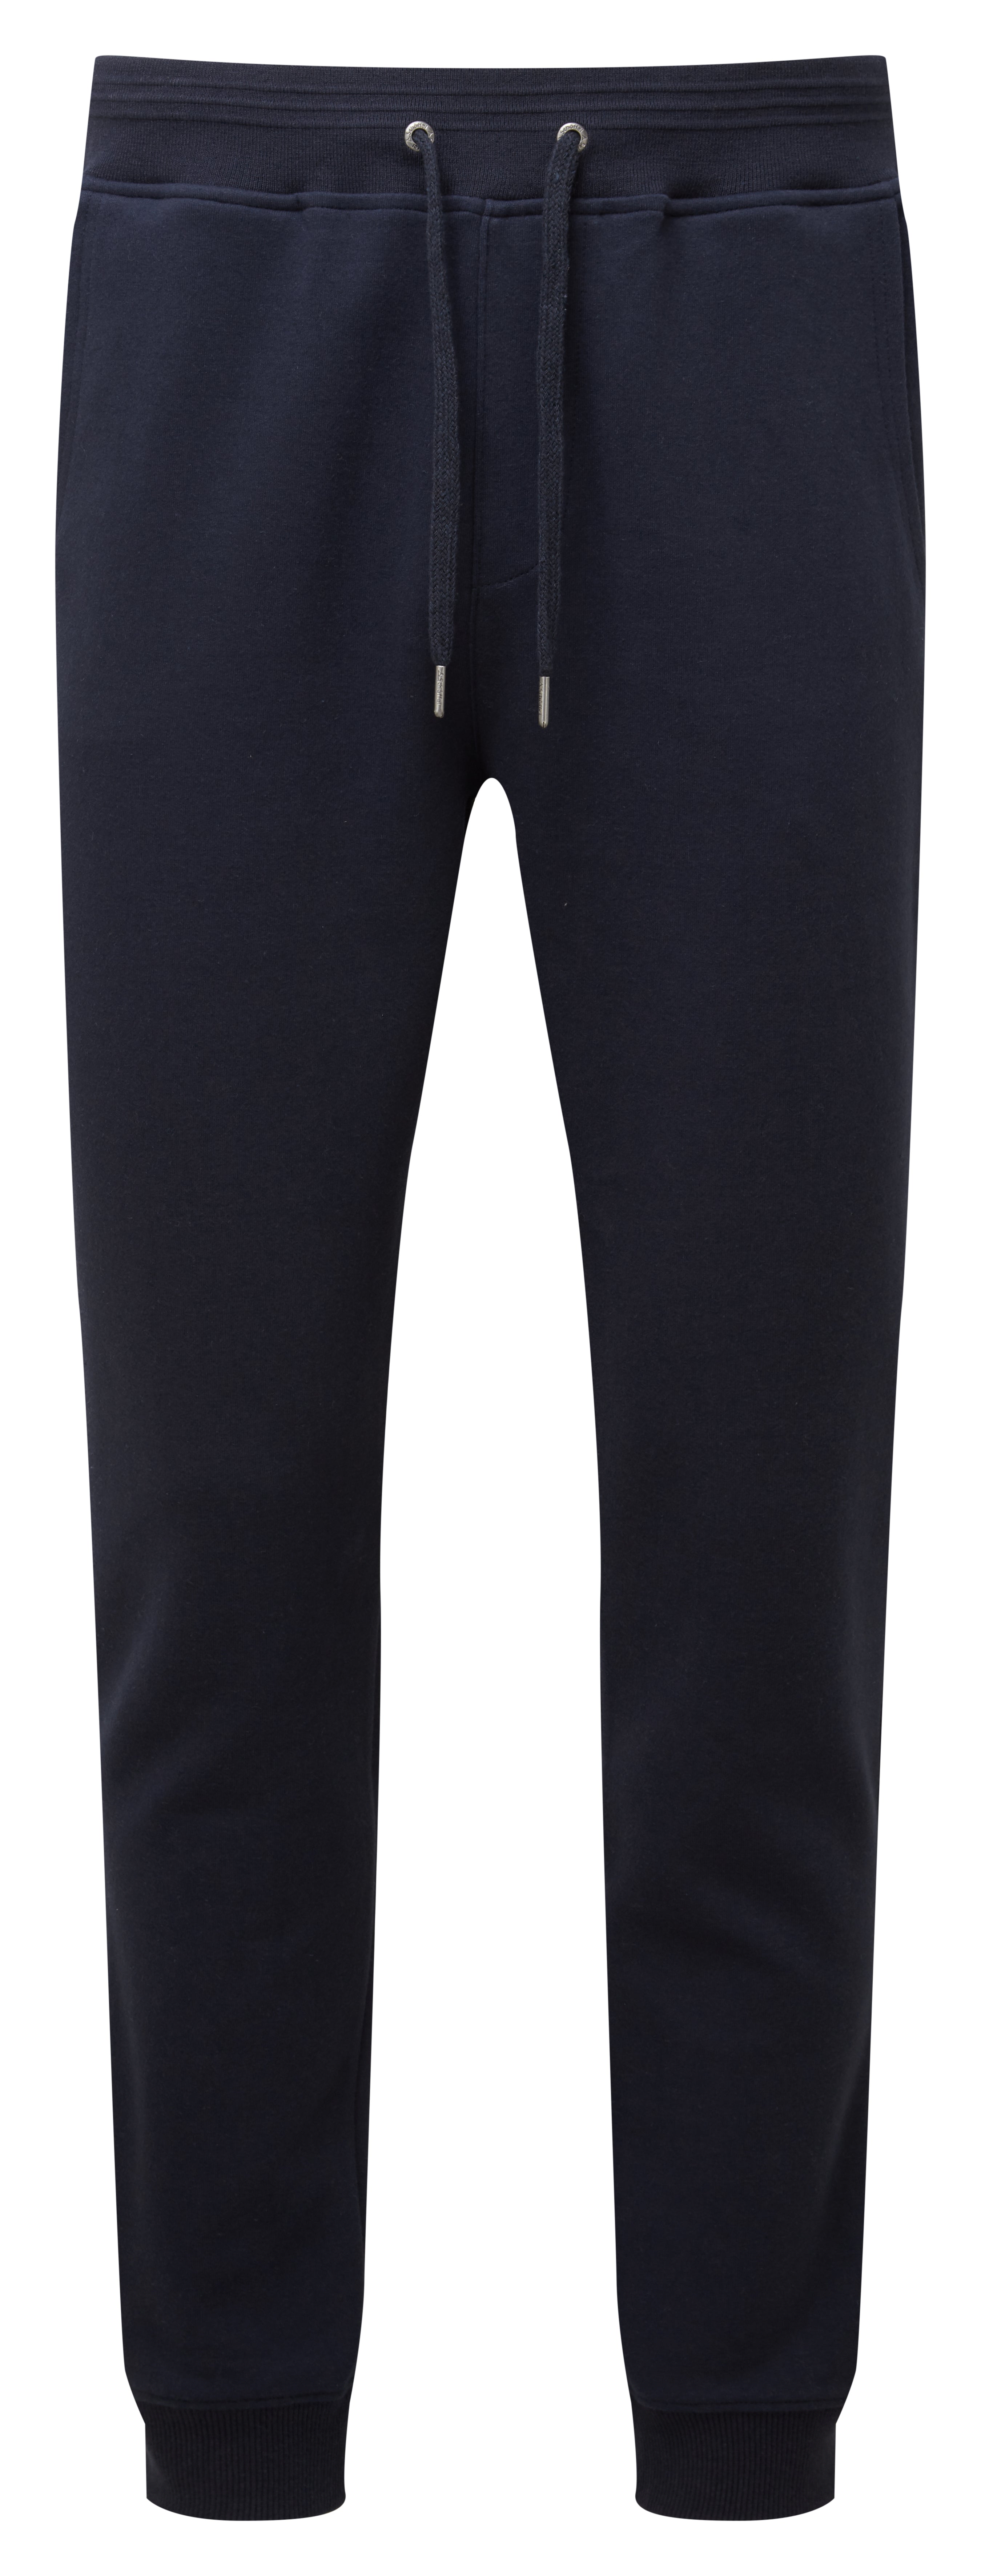 Falmouth Leisure Trouser - Navy